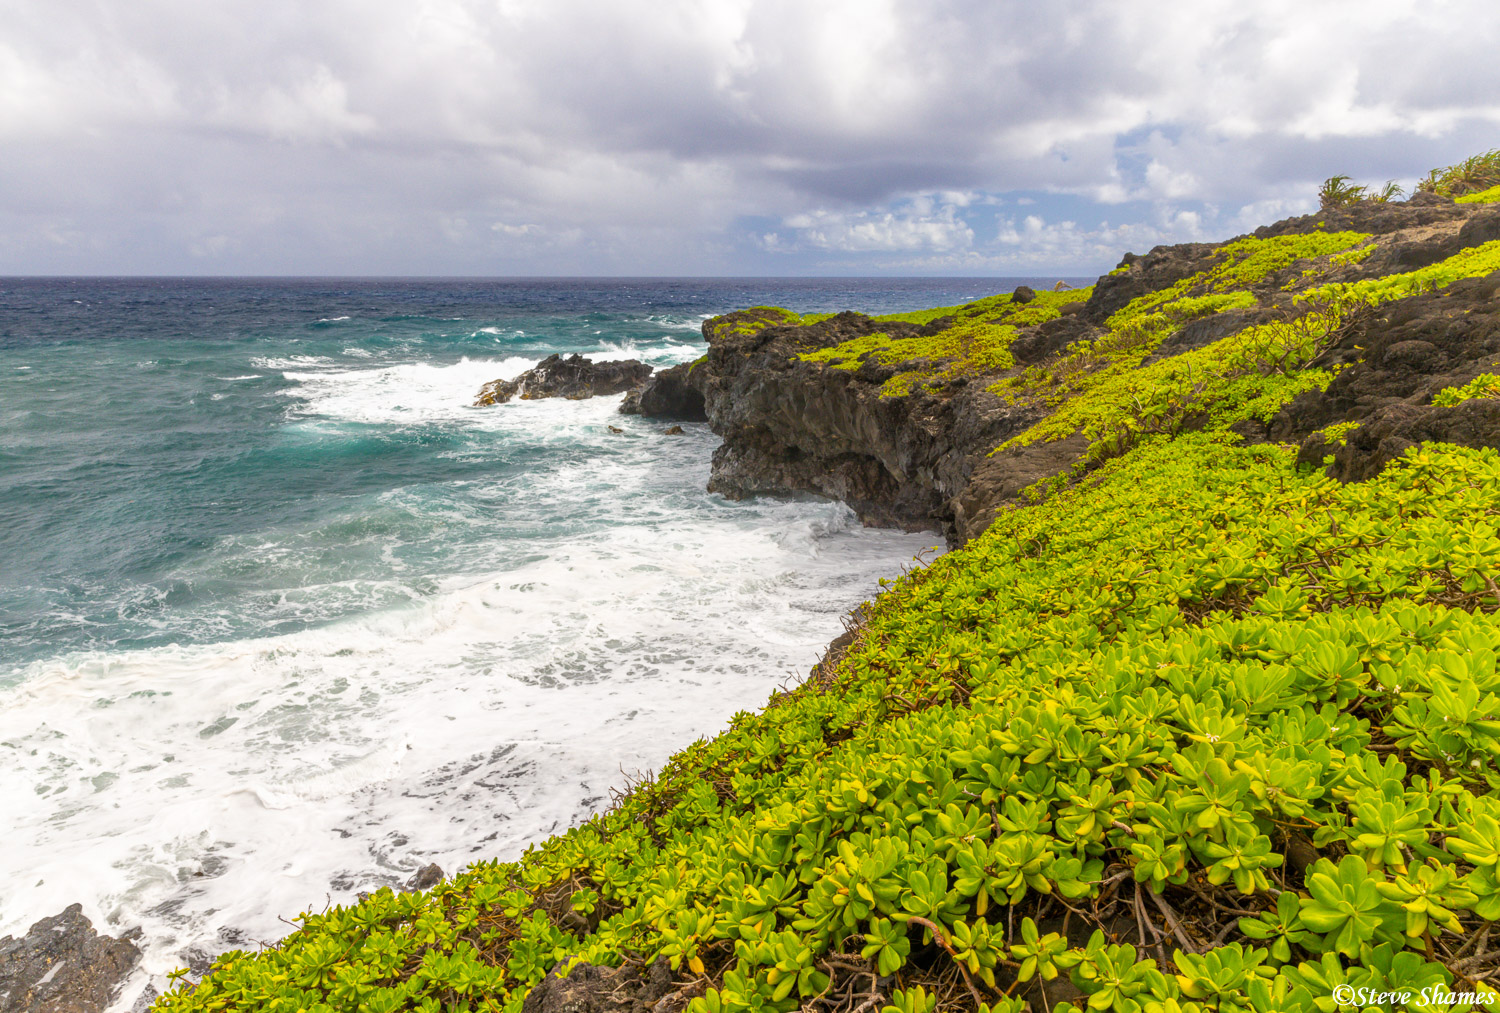 A typical Hawaiian Island scene, where land meets ocean. This was on the east side of Maui